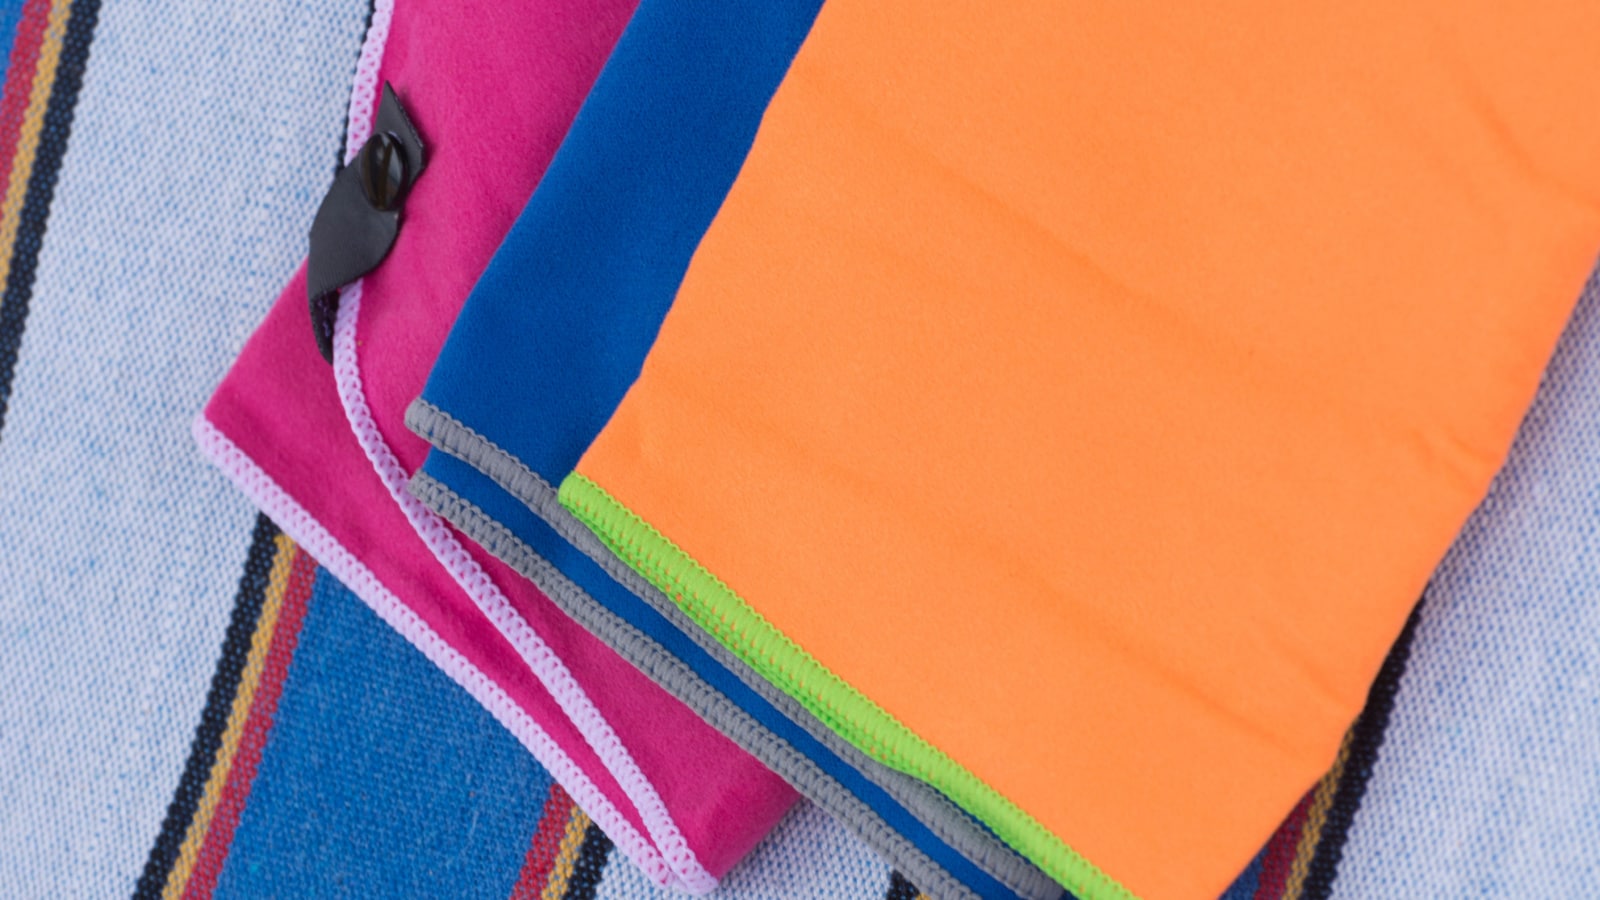 Microfiber towels on a beach lounger, outdoor activity concept. Background of multicolored towels close-up. Copy space.